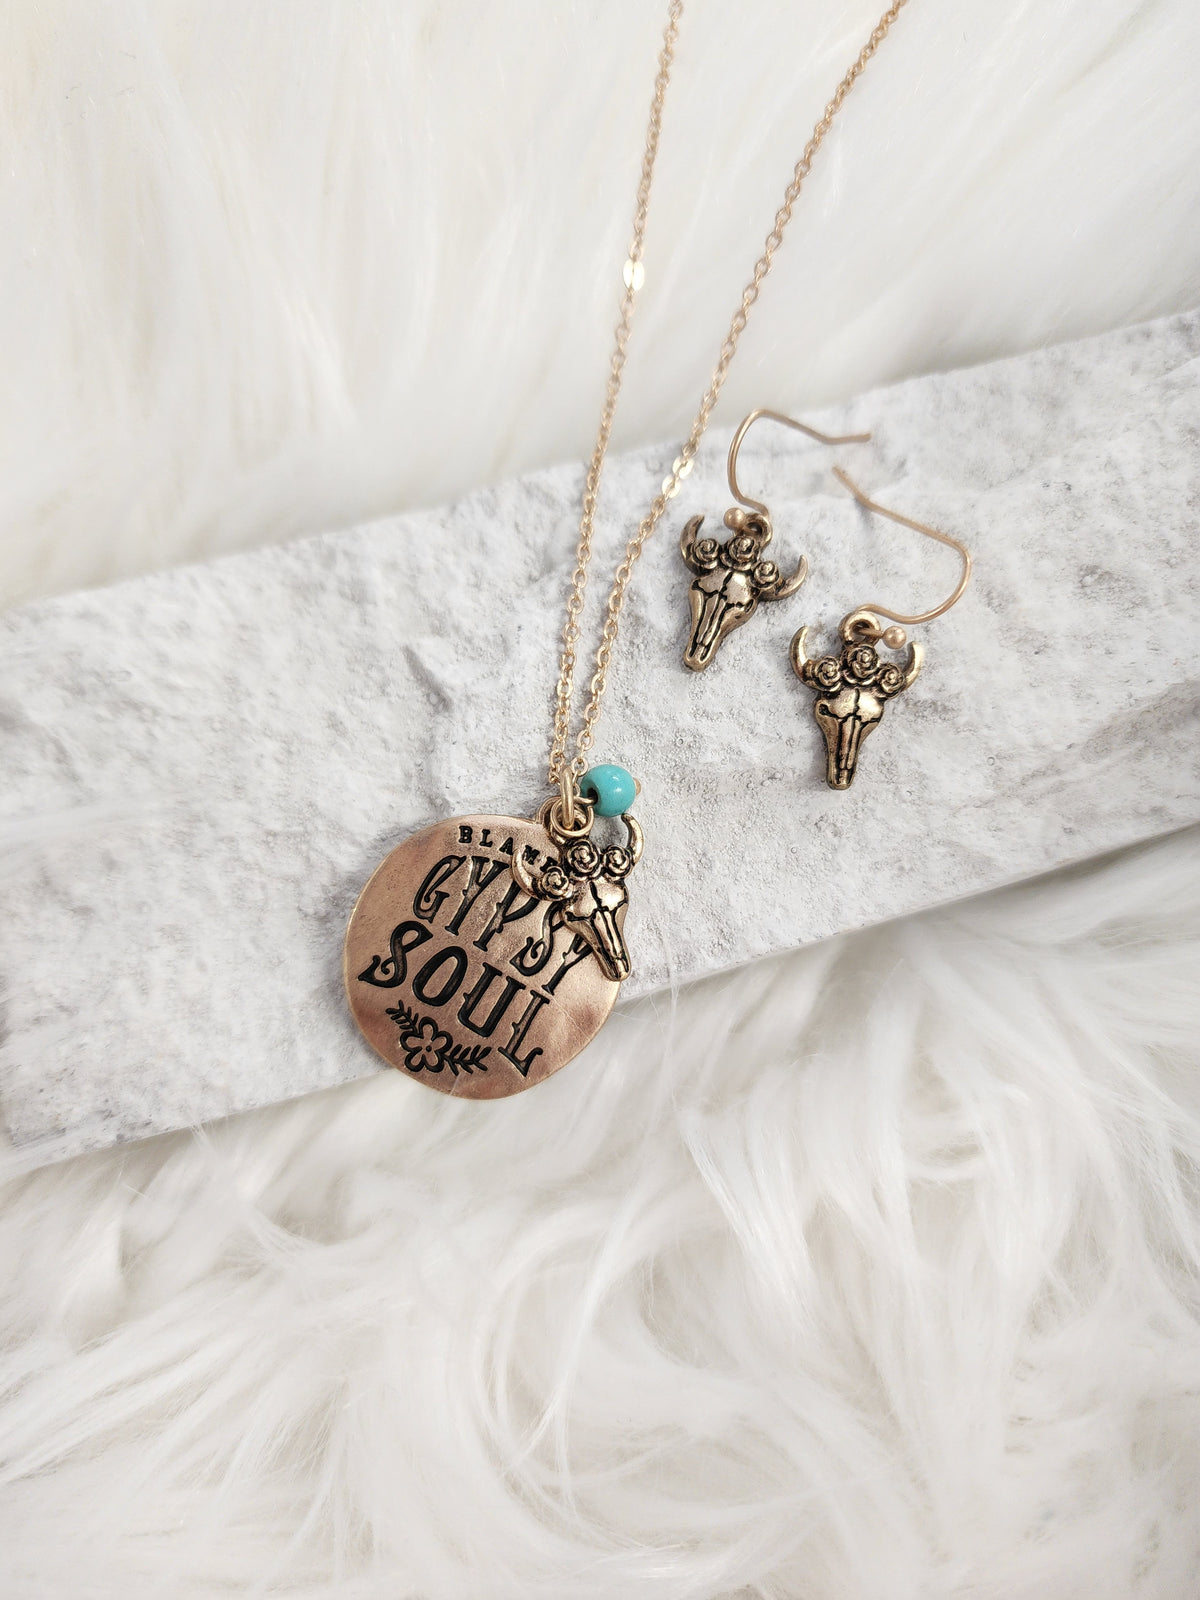 "Blame My Gypsy Soul" stamped necklace